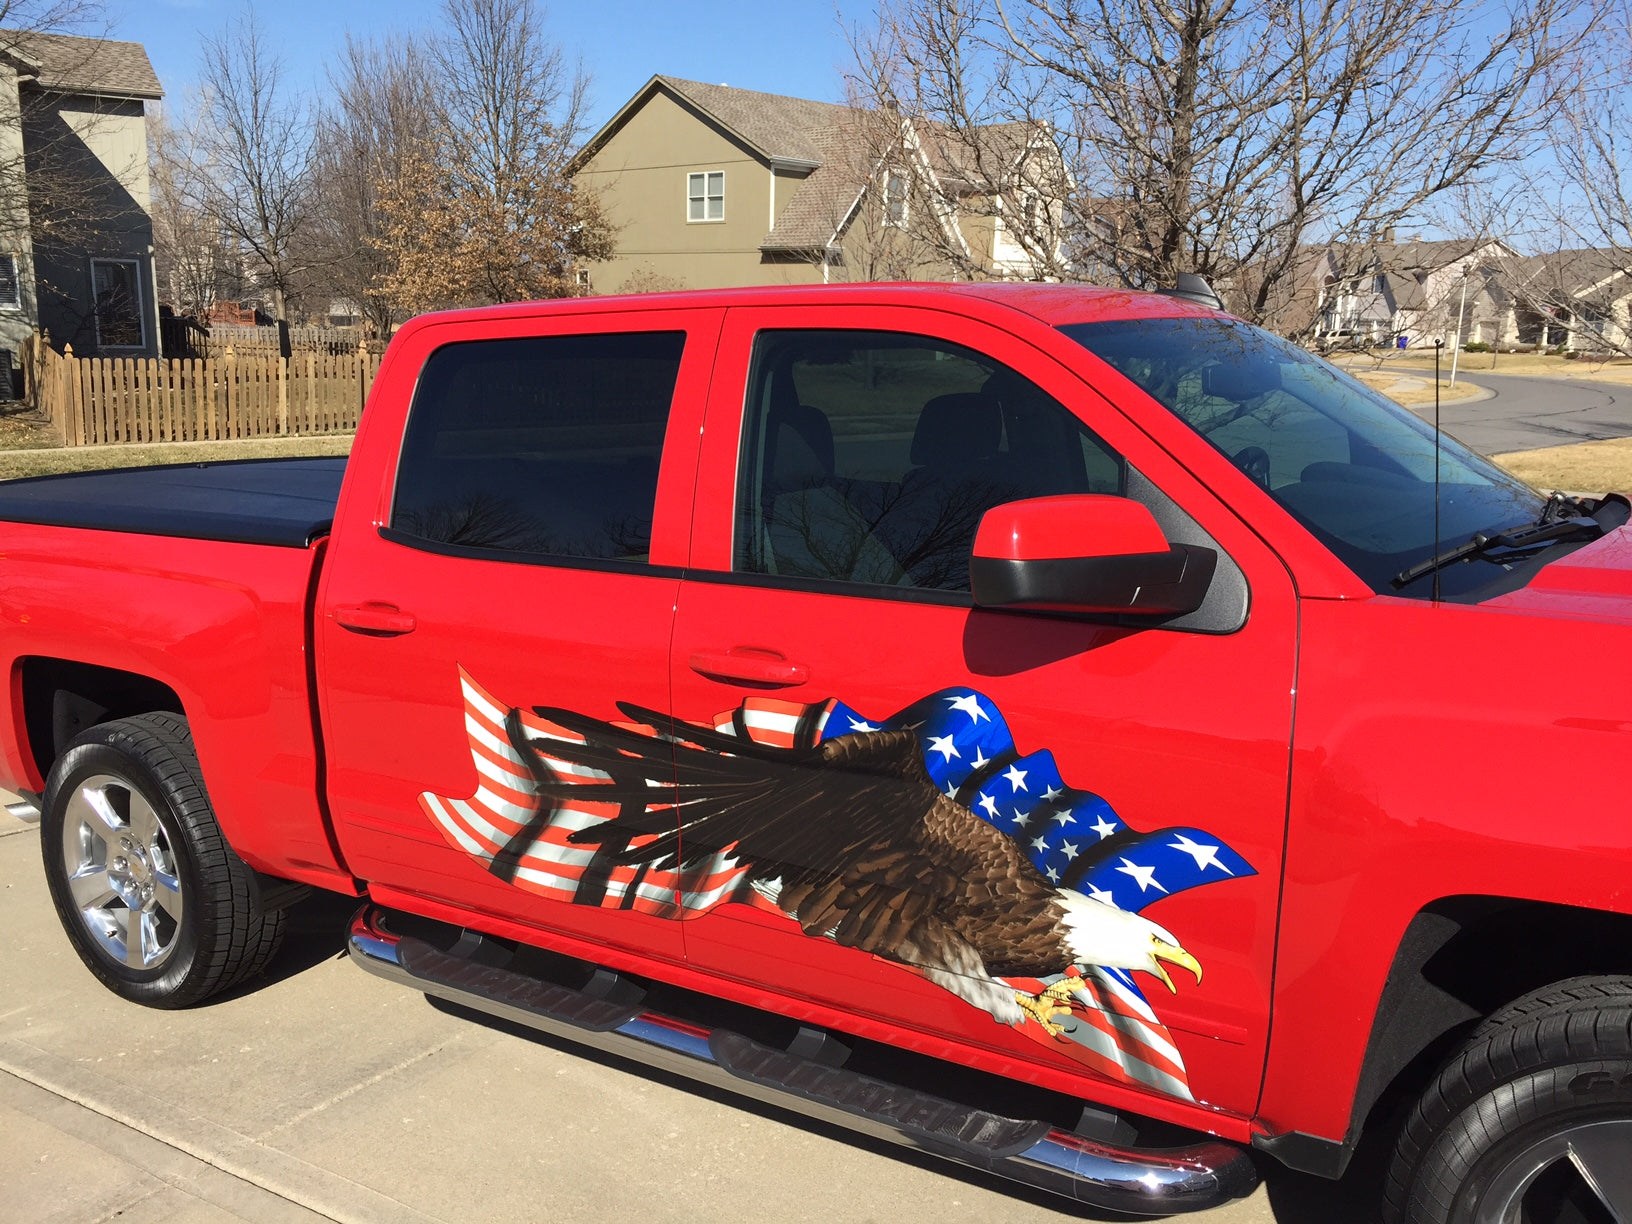 Bald eagle American flag decal on the side of a red pick up truck